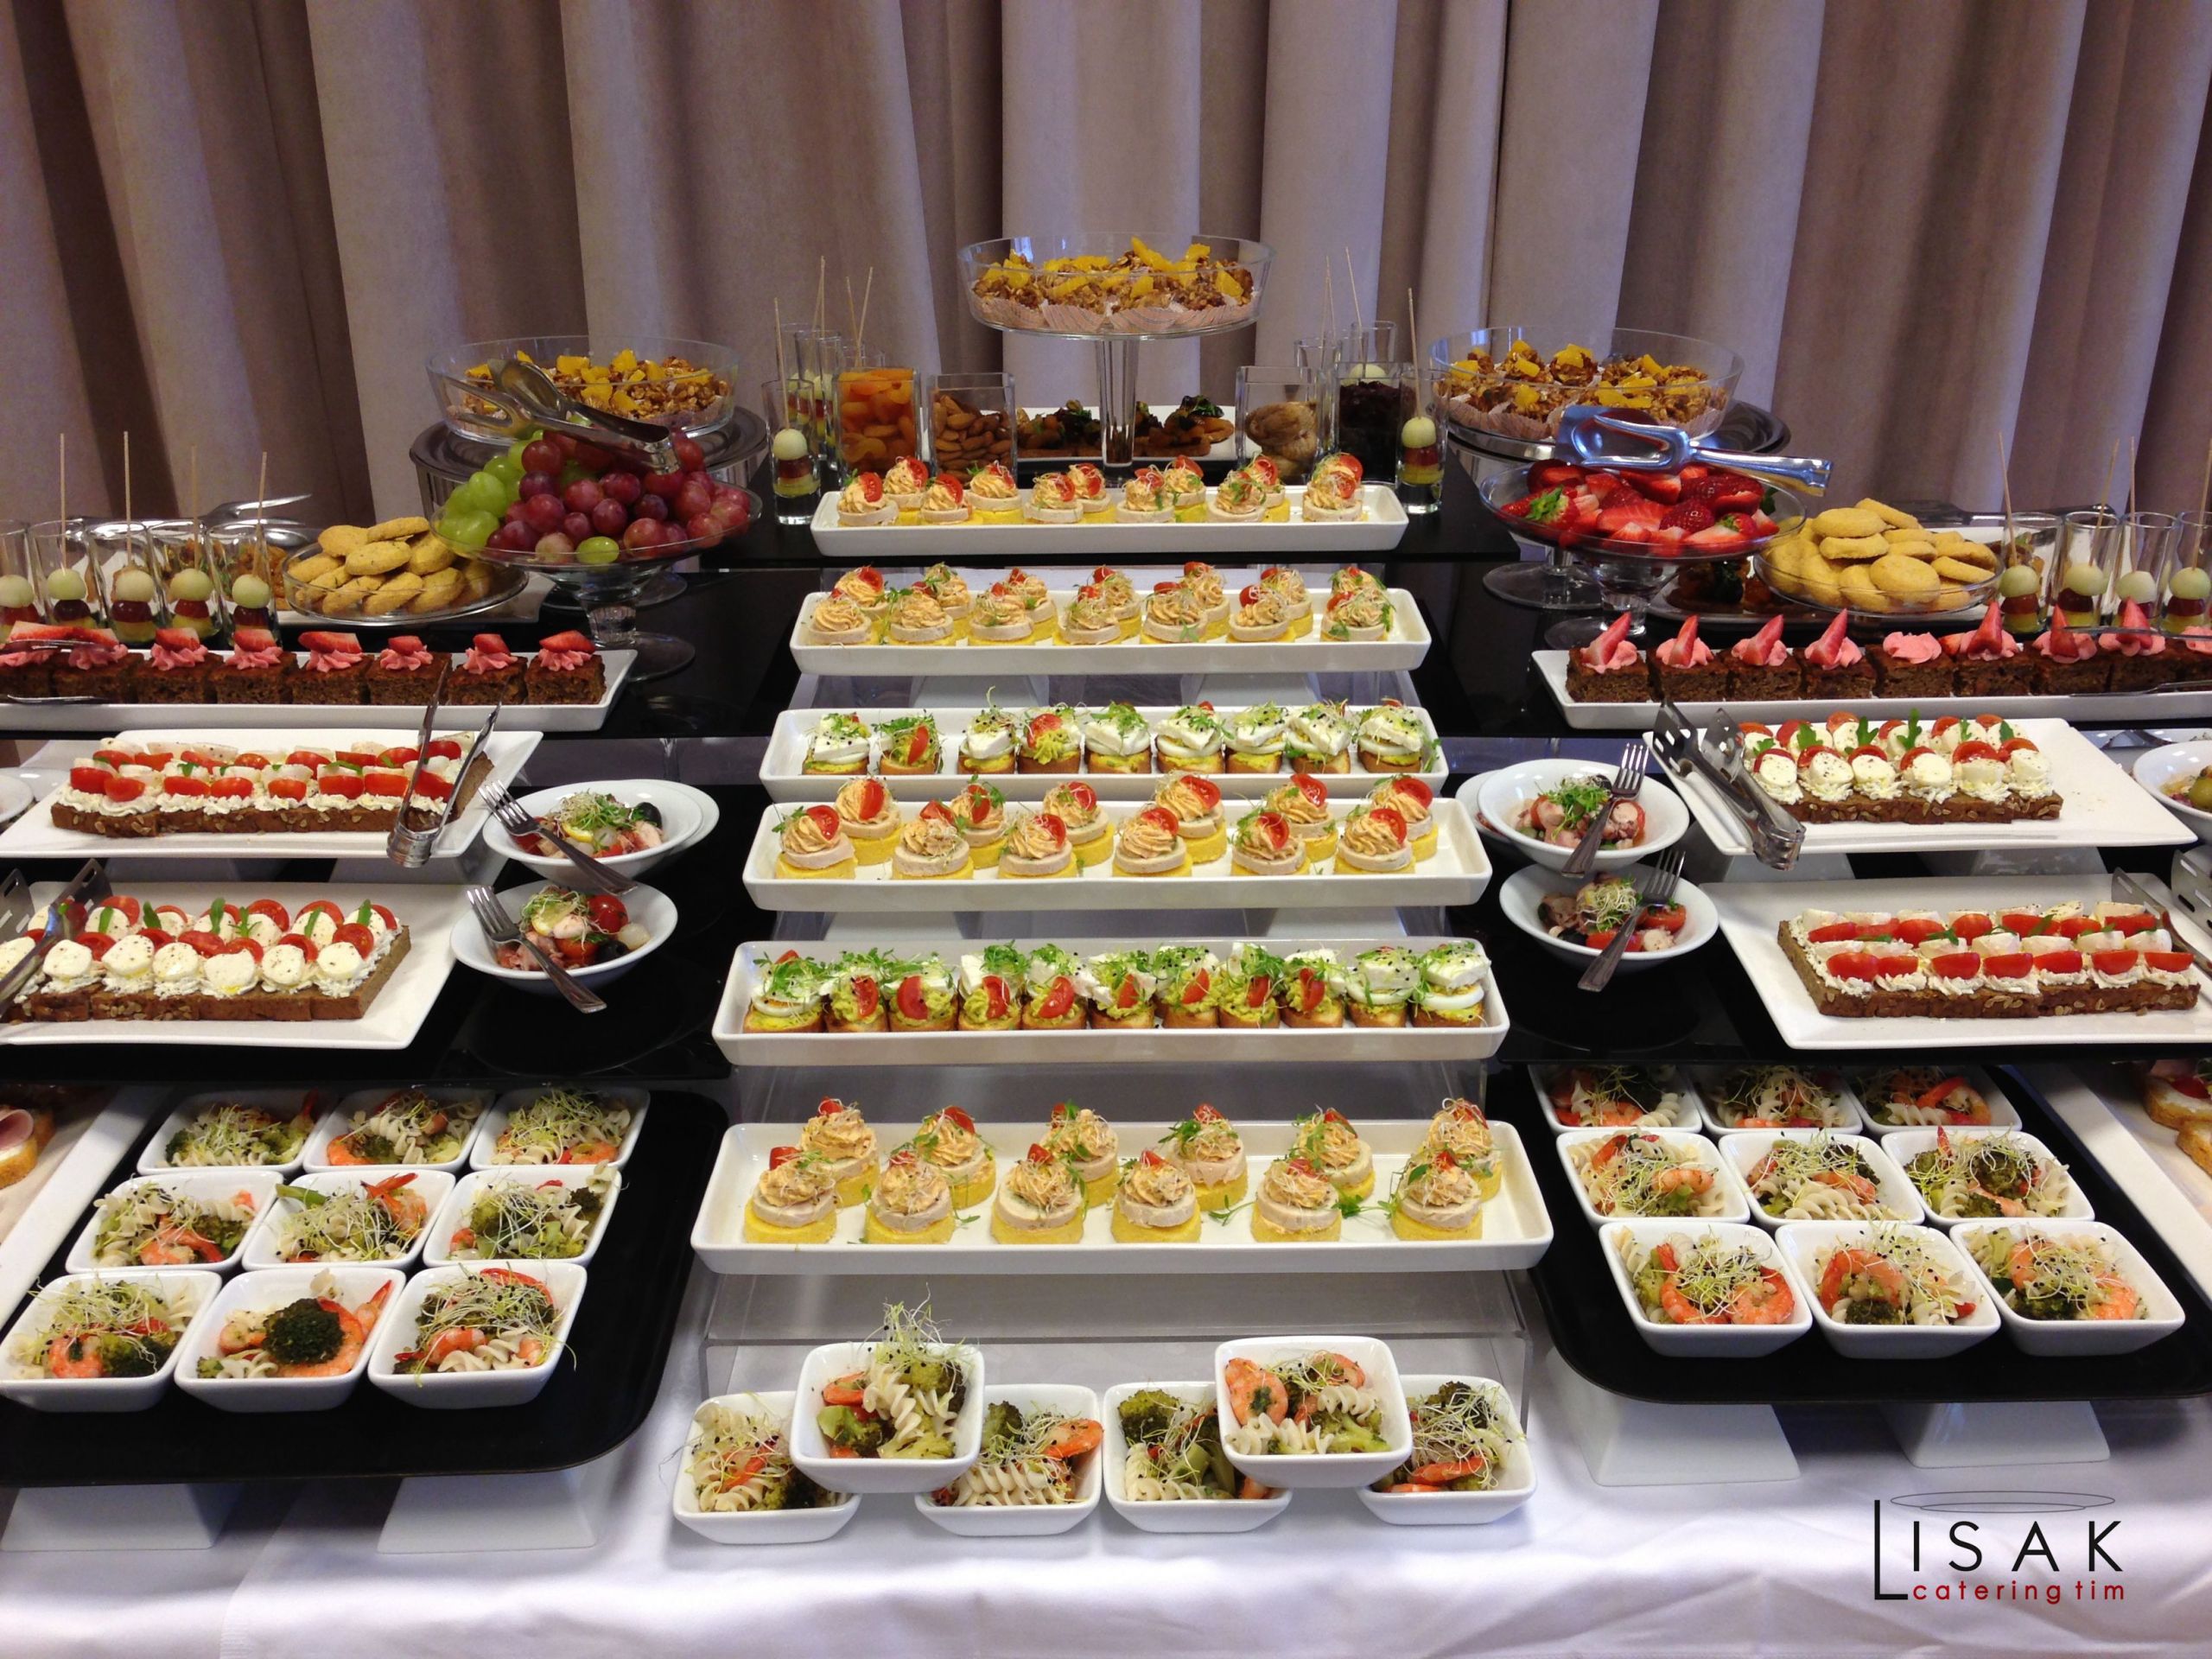 Party Food Ideas Buffet Finger Foods
 Catering fingerfood party buffet appetizer table